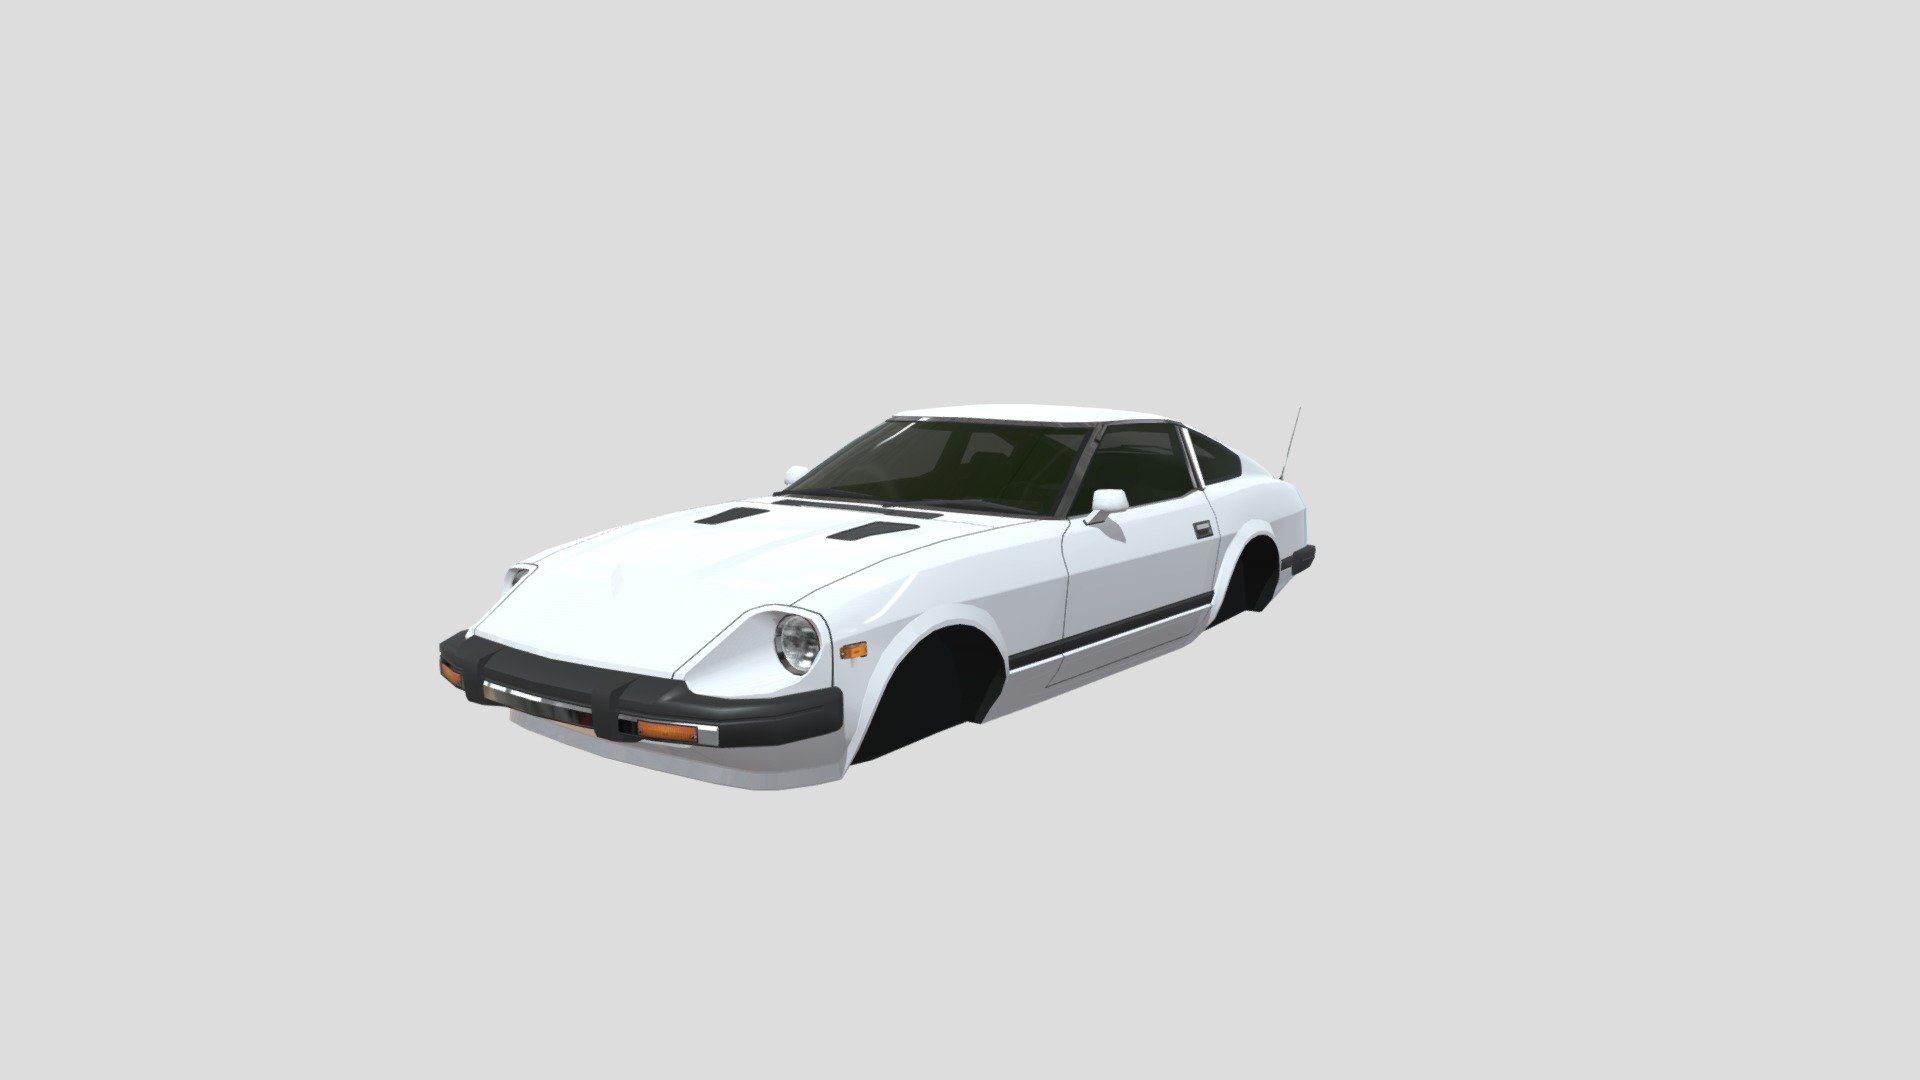 Nissan S130.
Just a car my guy 3d model